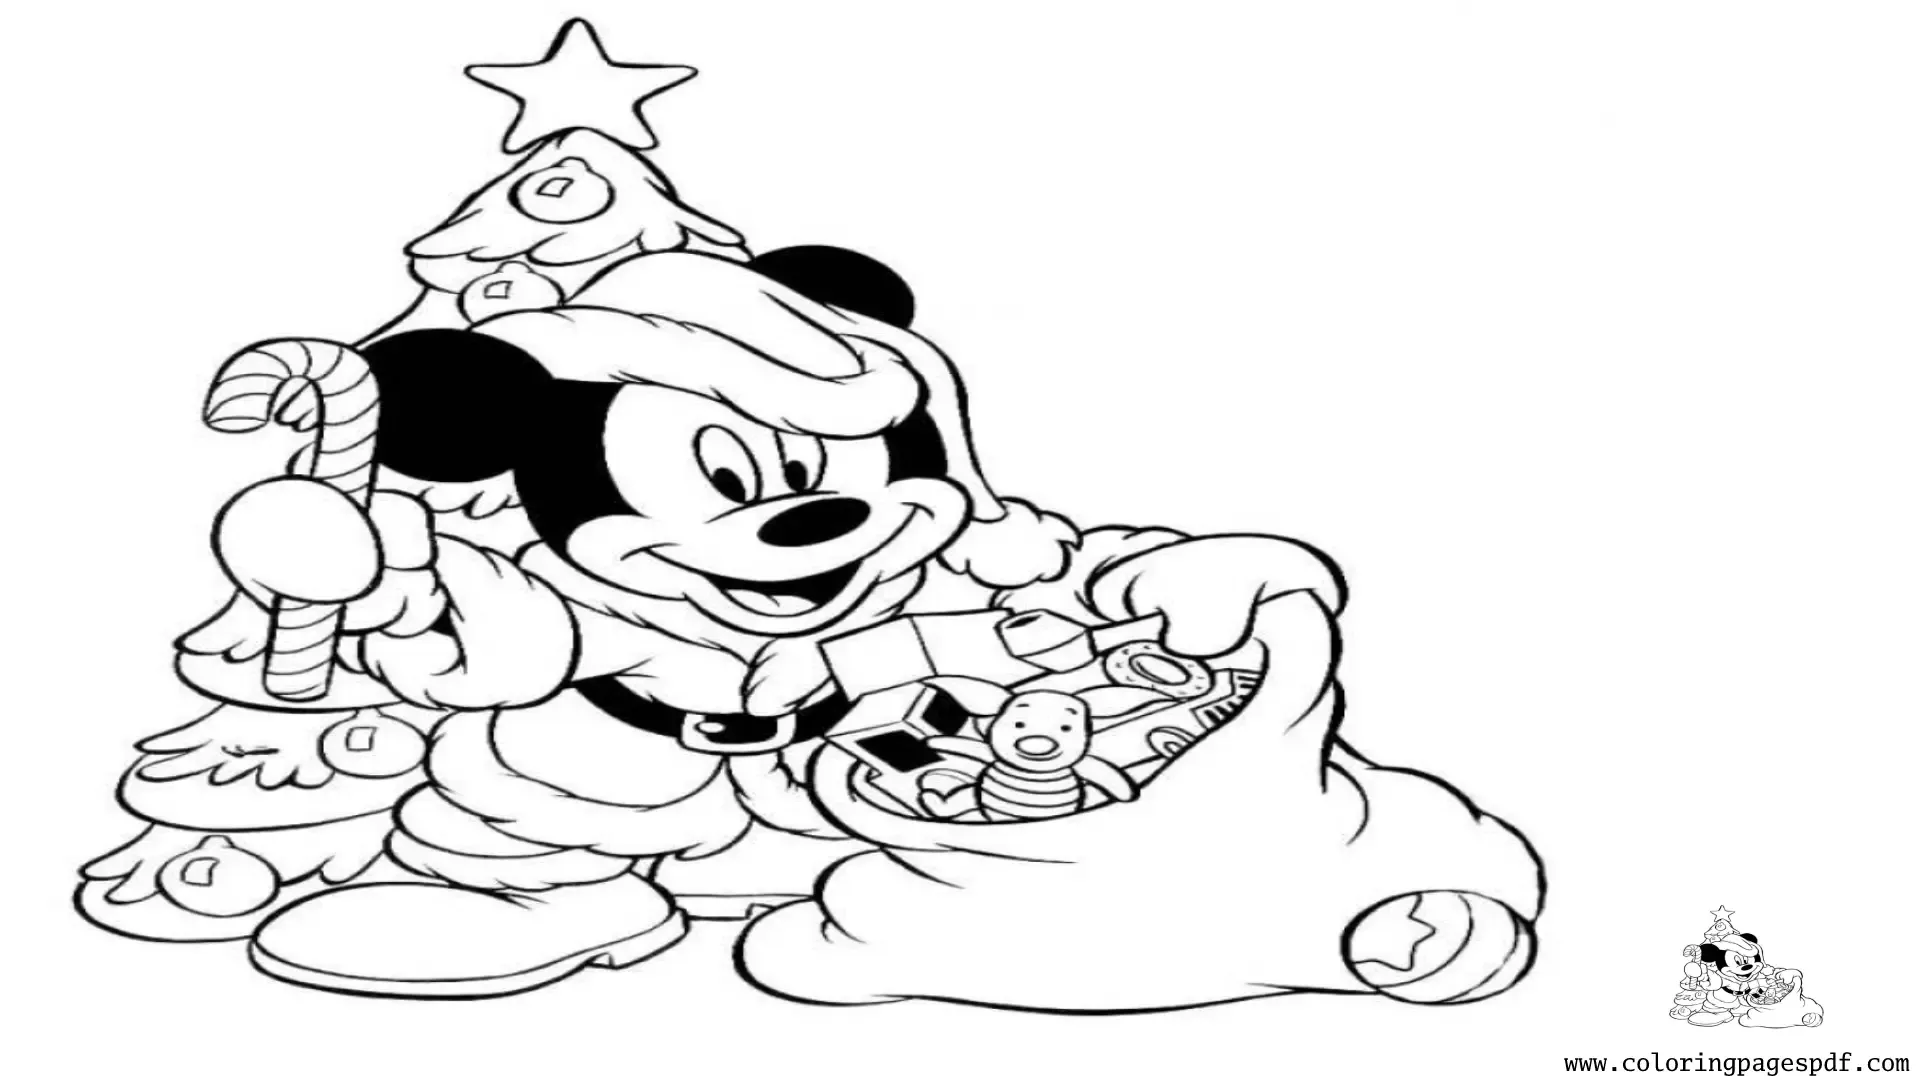 Coloring Page Of Mickey Mouse Giving Gifts